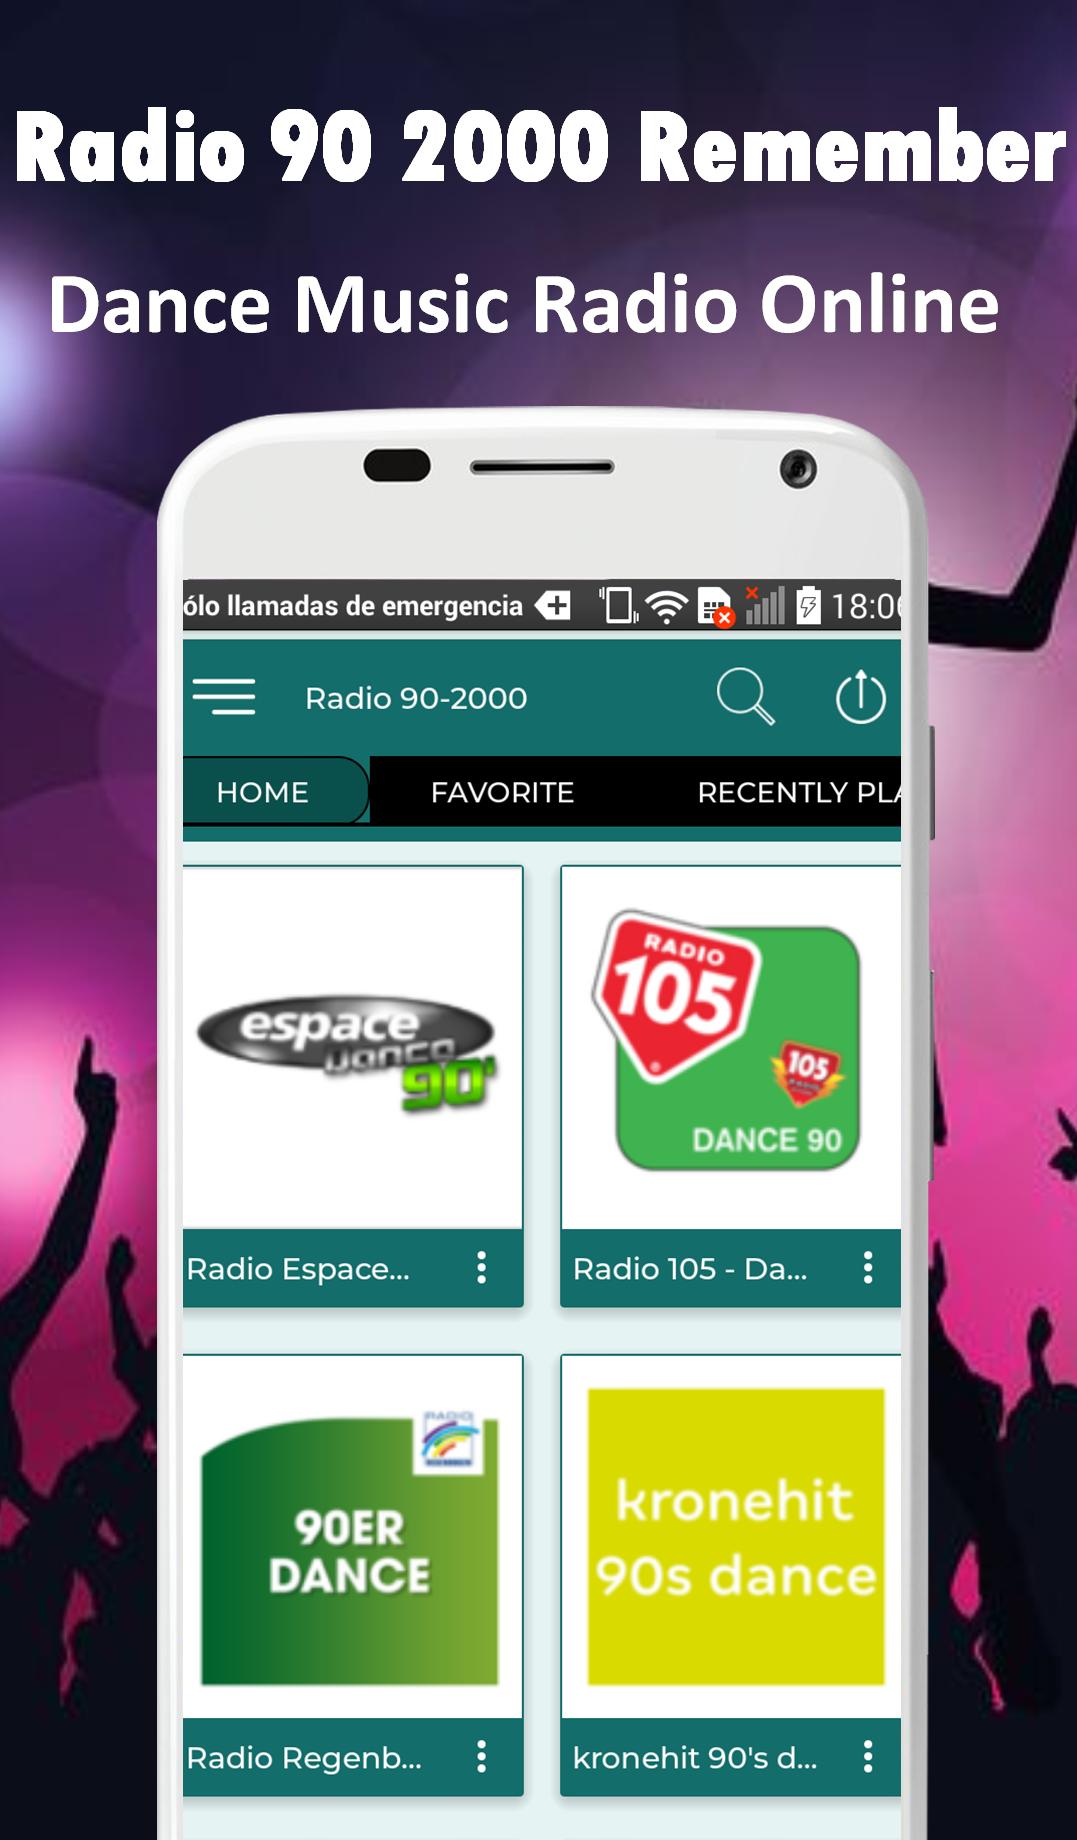 Radio 90 2000 Remember Dance Music Radio Online for Android - APK Download